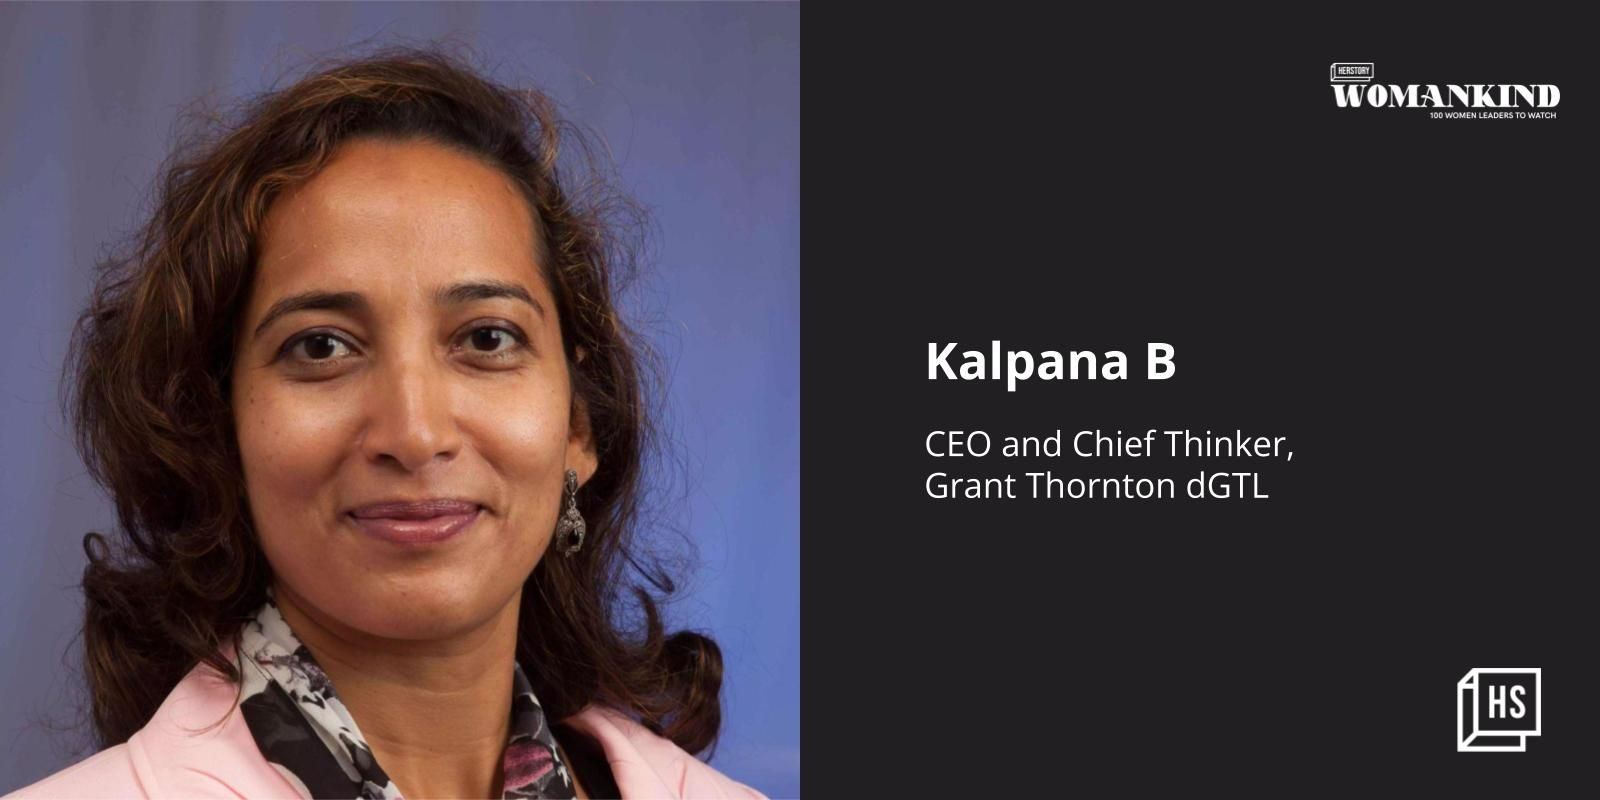 [100 Emerging Women Leaders] Kalpana B, CEO of Grant Thornton dGTL, on juggling multiple roles and dealing with biases